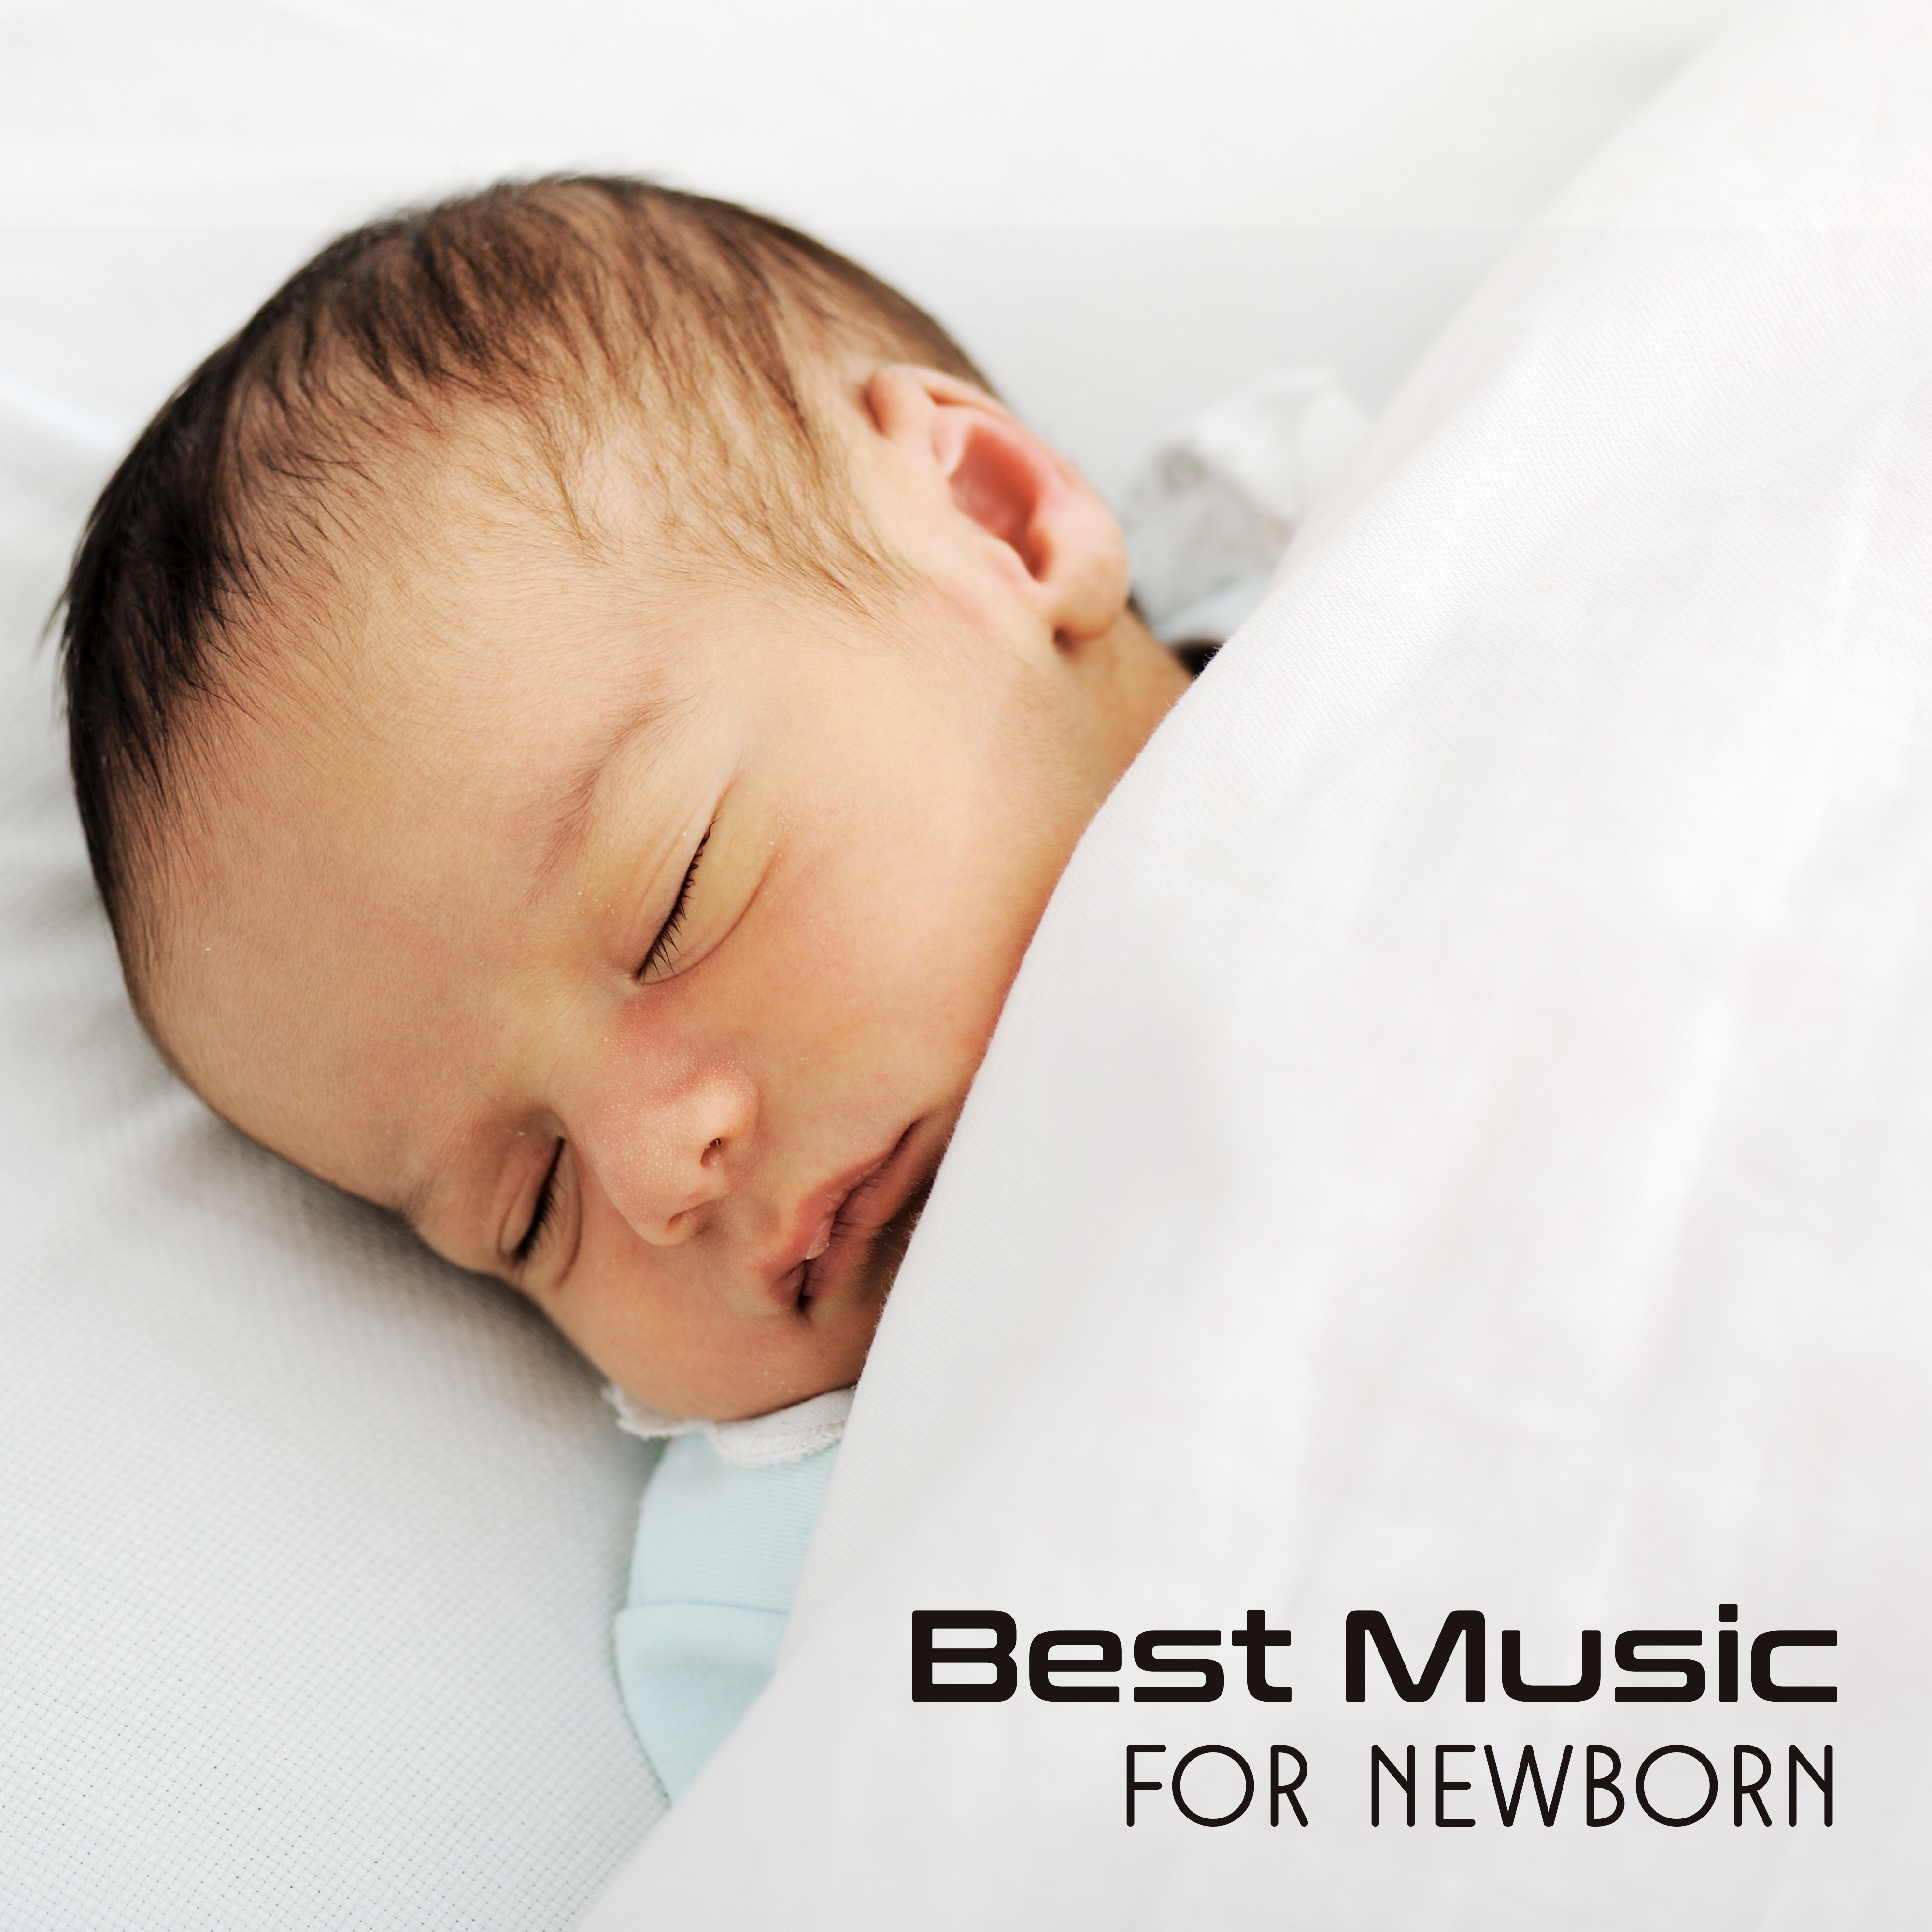 Best Music for Newborn – Relaxing Nature Sounds, Calm Down Babies, White Noise, Relaxing Music for Baby, New Age 2017